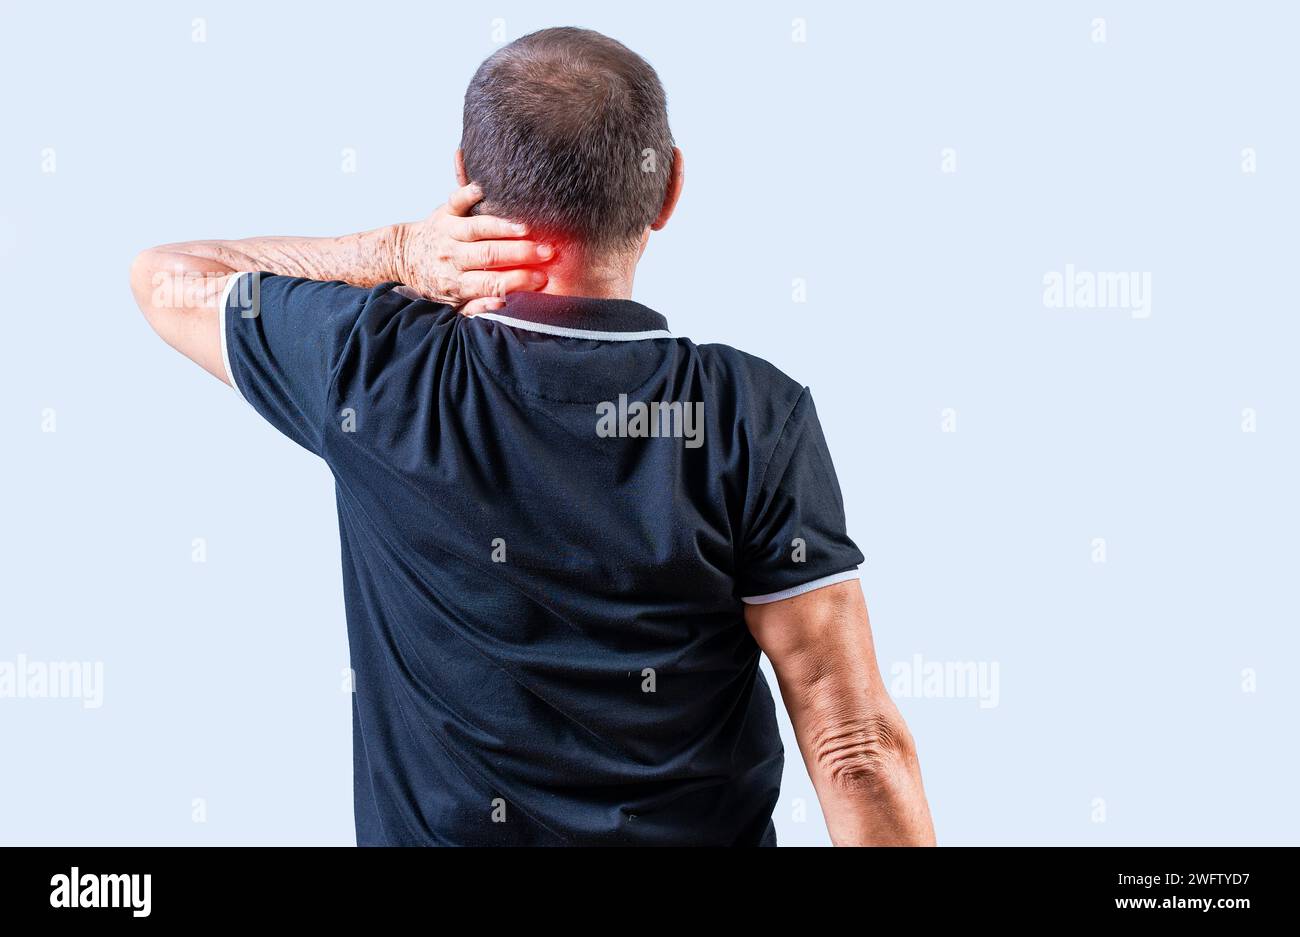 People suffering with neck pain isolated. Rear view of Mature man with neck tension isolated. Neck pain and stress concept Stock Photo